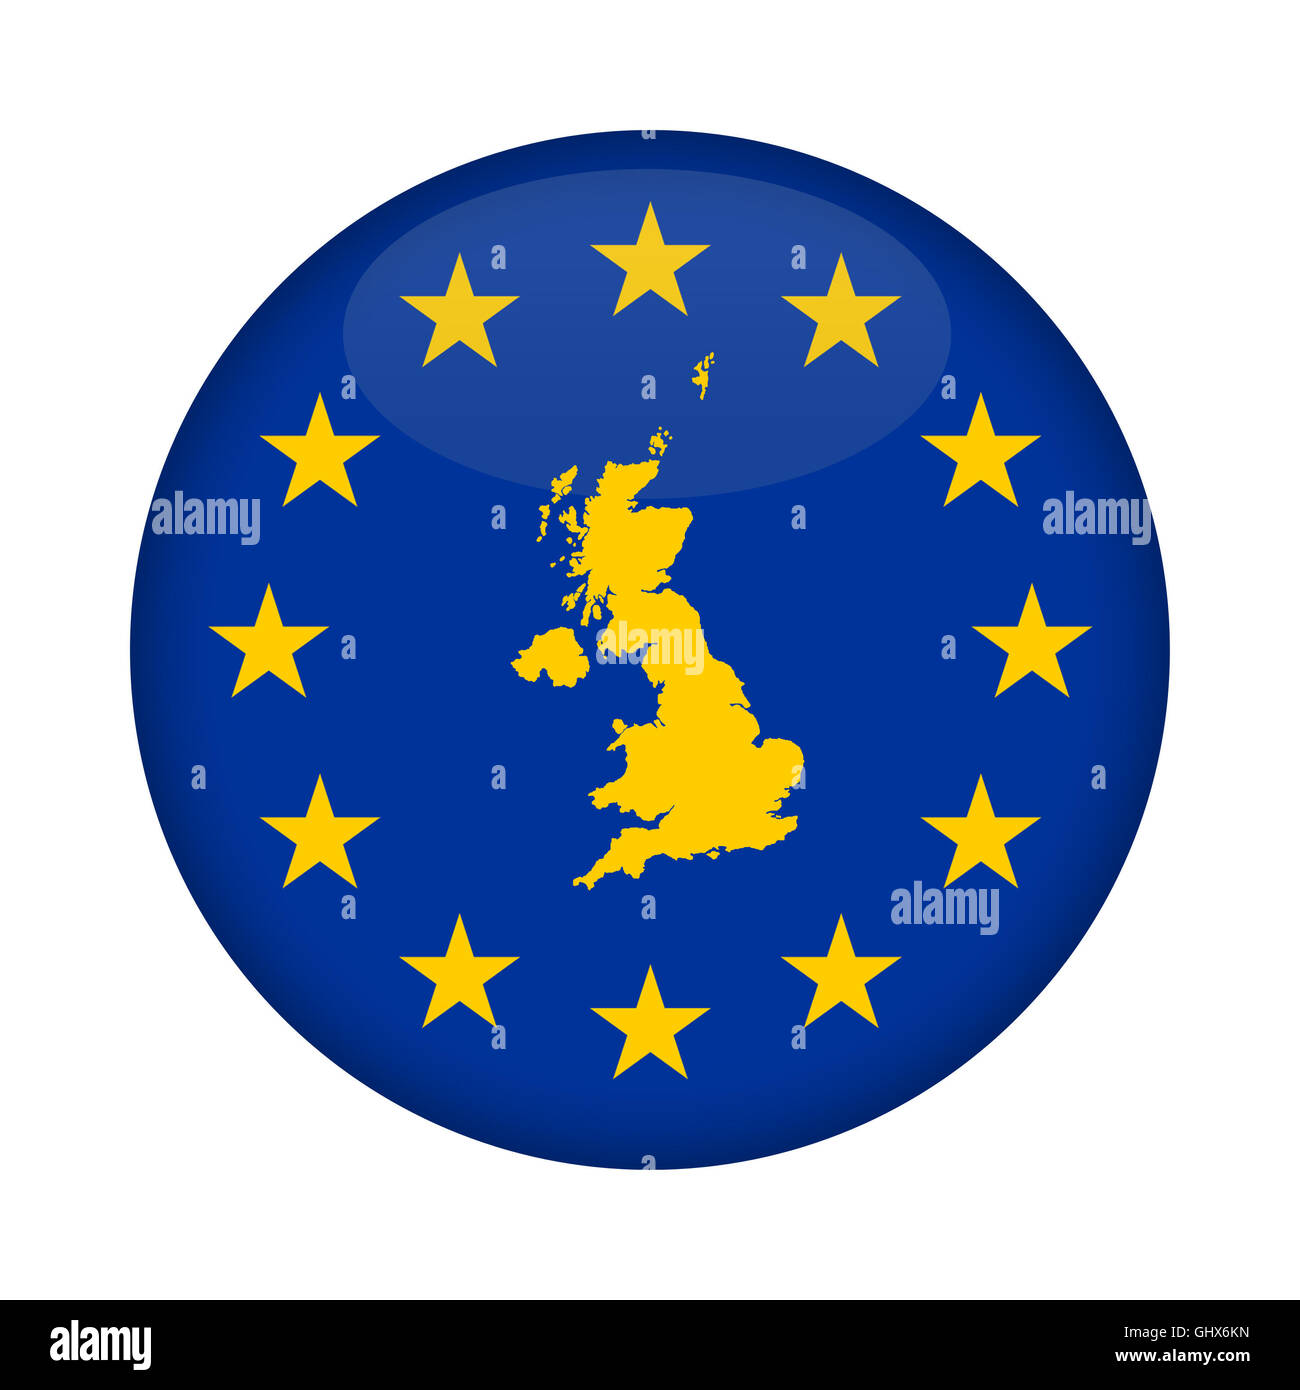 United Kingdom map on a European Union flag button isolated on a white background. Stock Photo